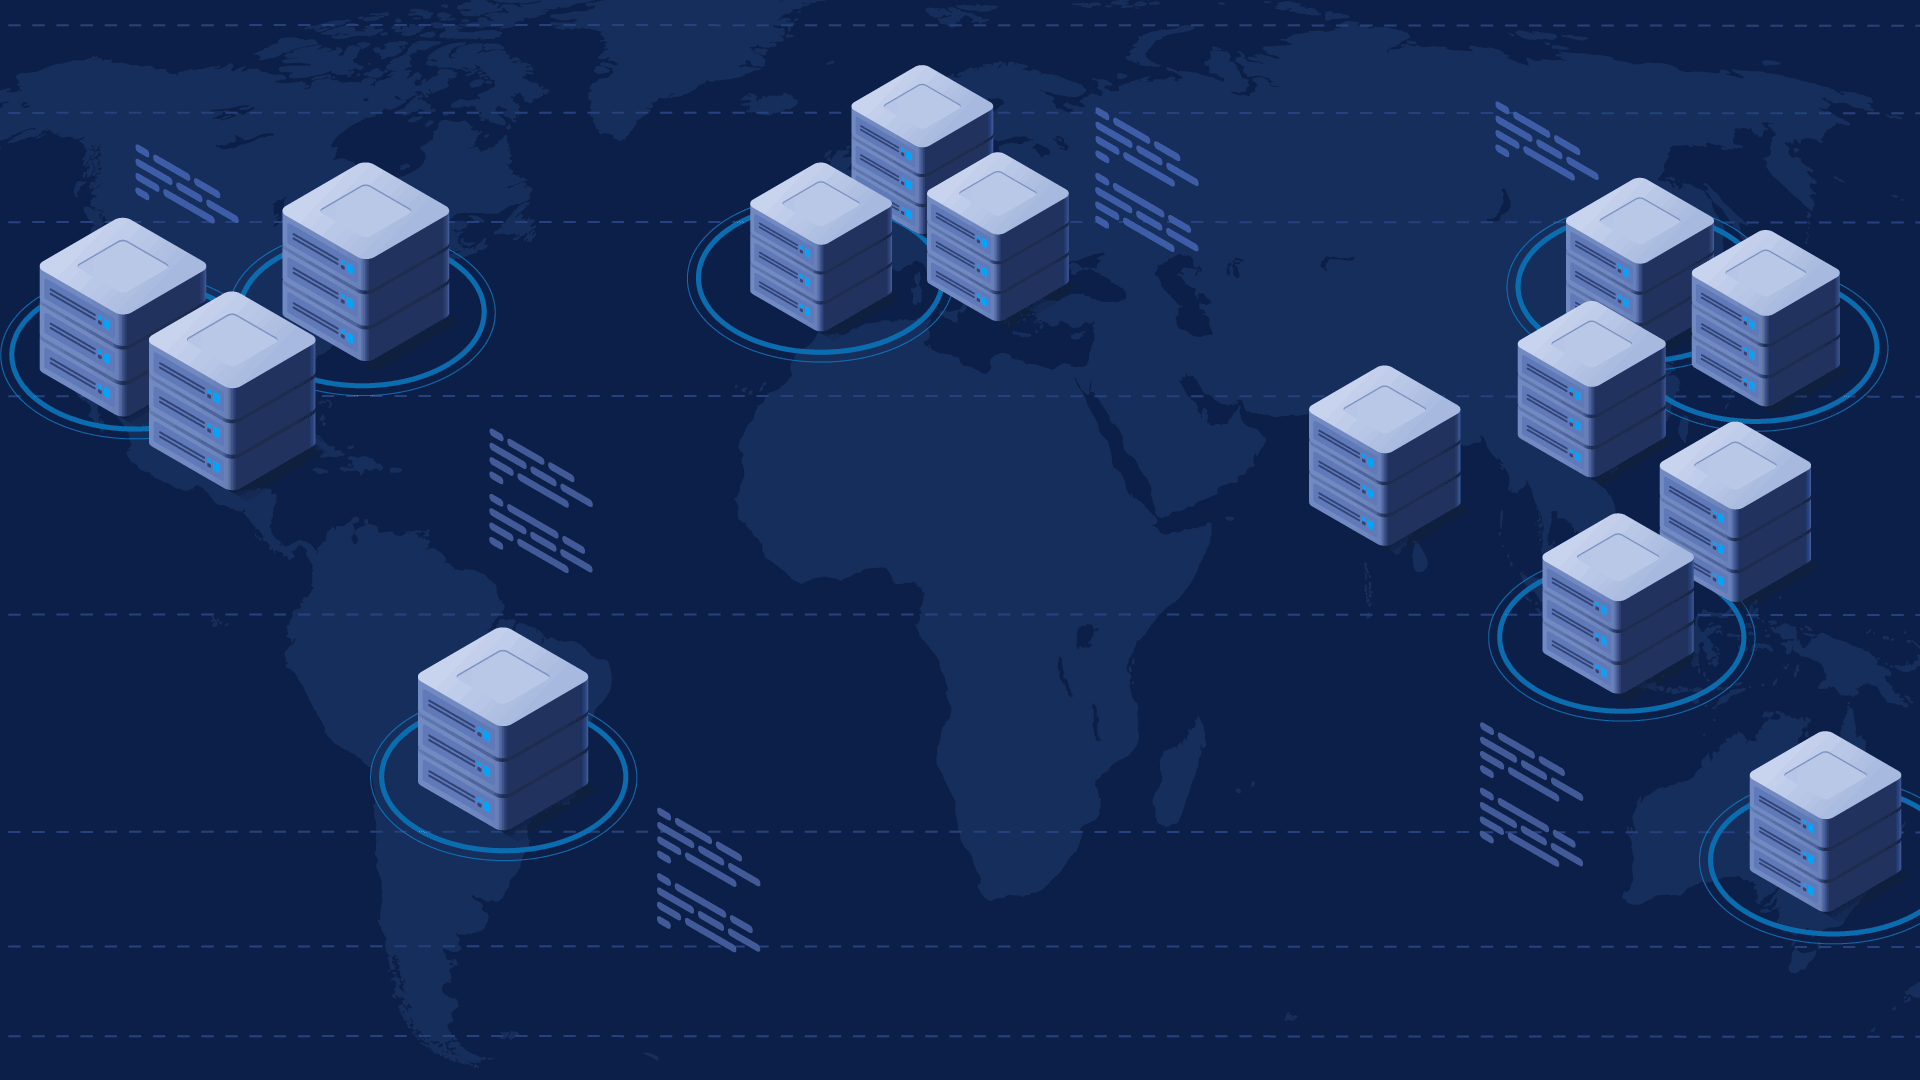 AWS global infrastructure: Regions, Availability Zones, and Edge Locations